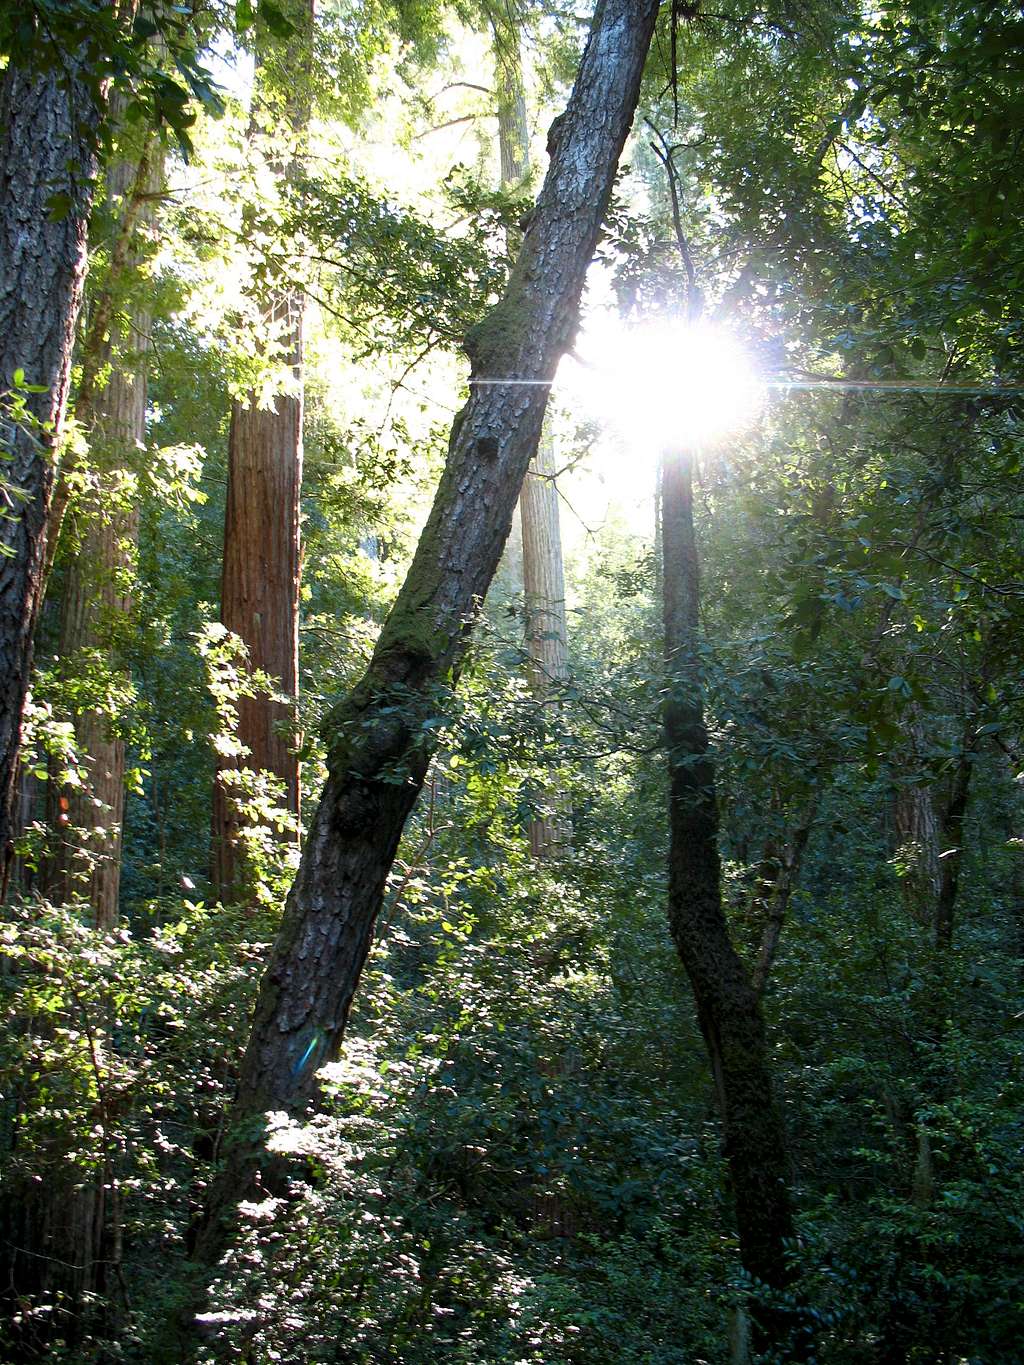 Hike through Big Basin S.P. en route to Buzzard's Roost